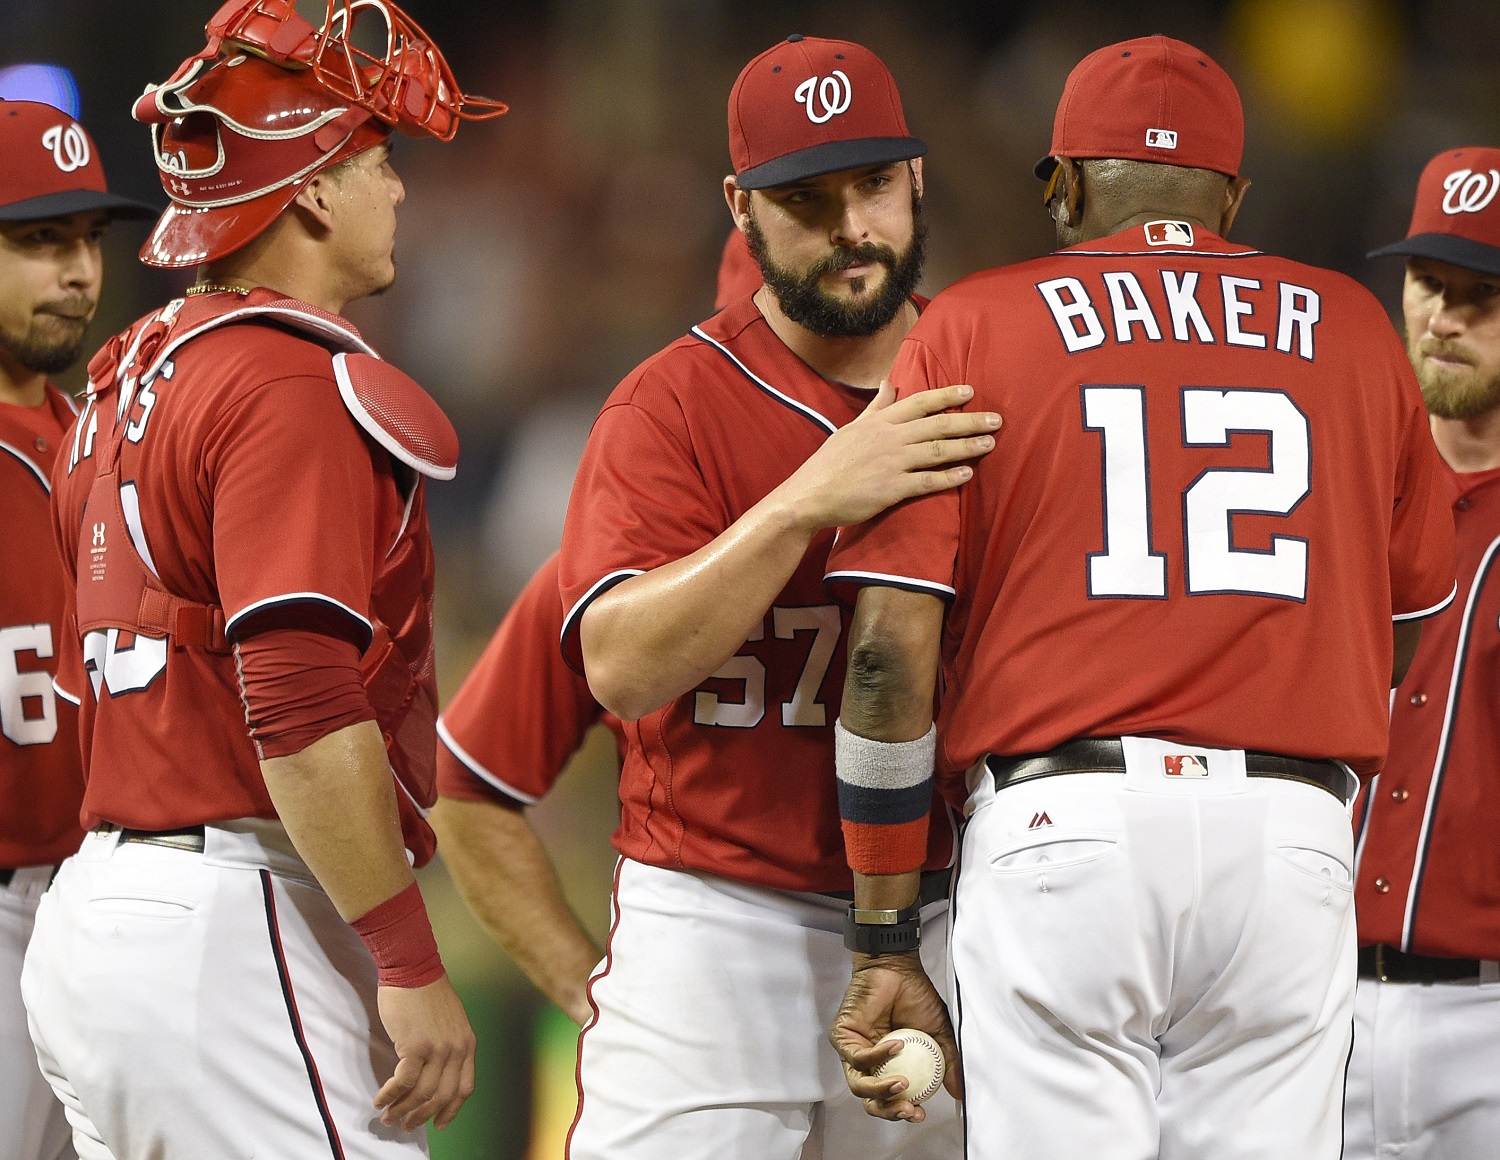 Washington Nationals starting pitcher Tanner Roark (57) is pulled form the baseball game by manager Dusty Baker (12) during the ninth inning against the Pittsburgh Pirates, Saturday, July 16, 2016, in Washington. Nationals catcher Wilson Ramos is at left. The Nationals won 6-0. (AP Photo/Nick Wass)